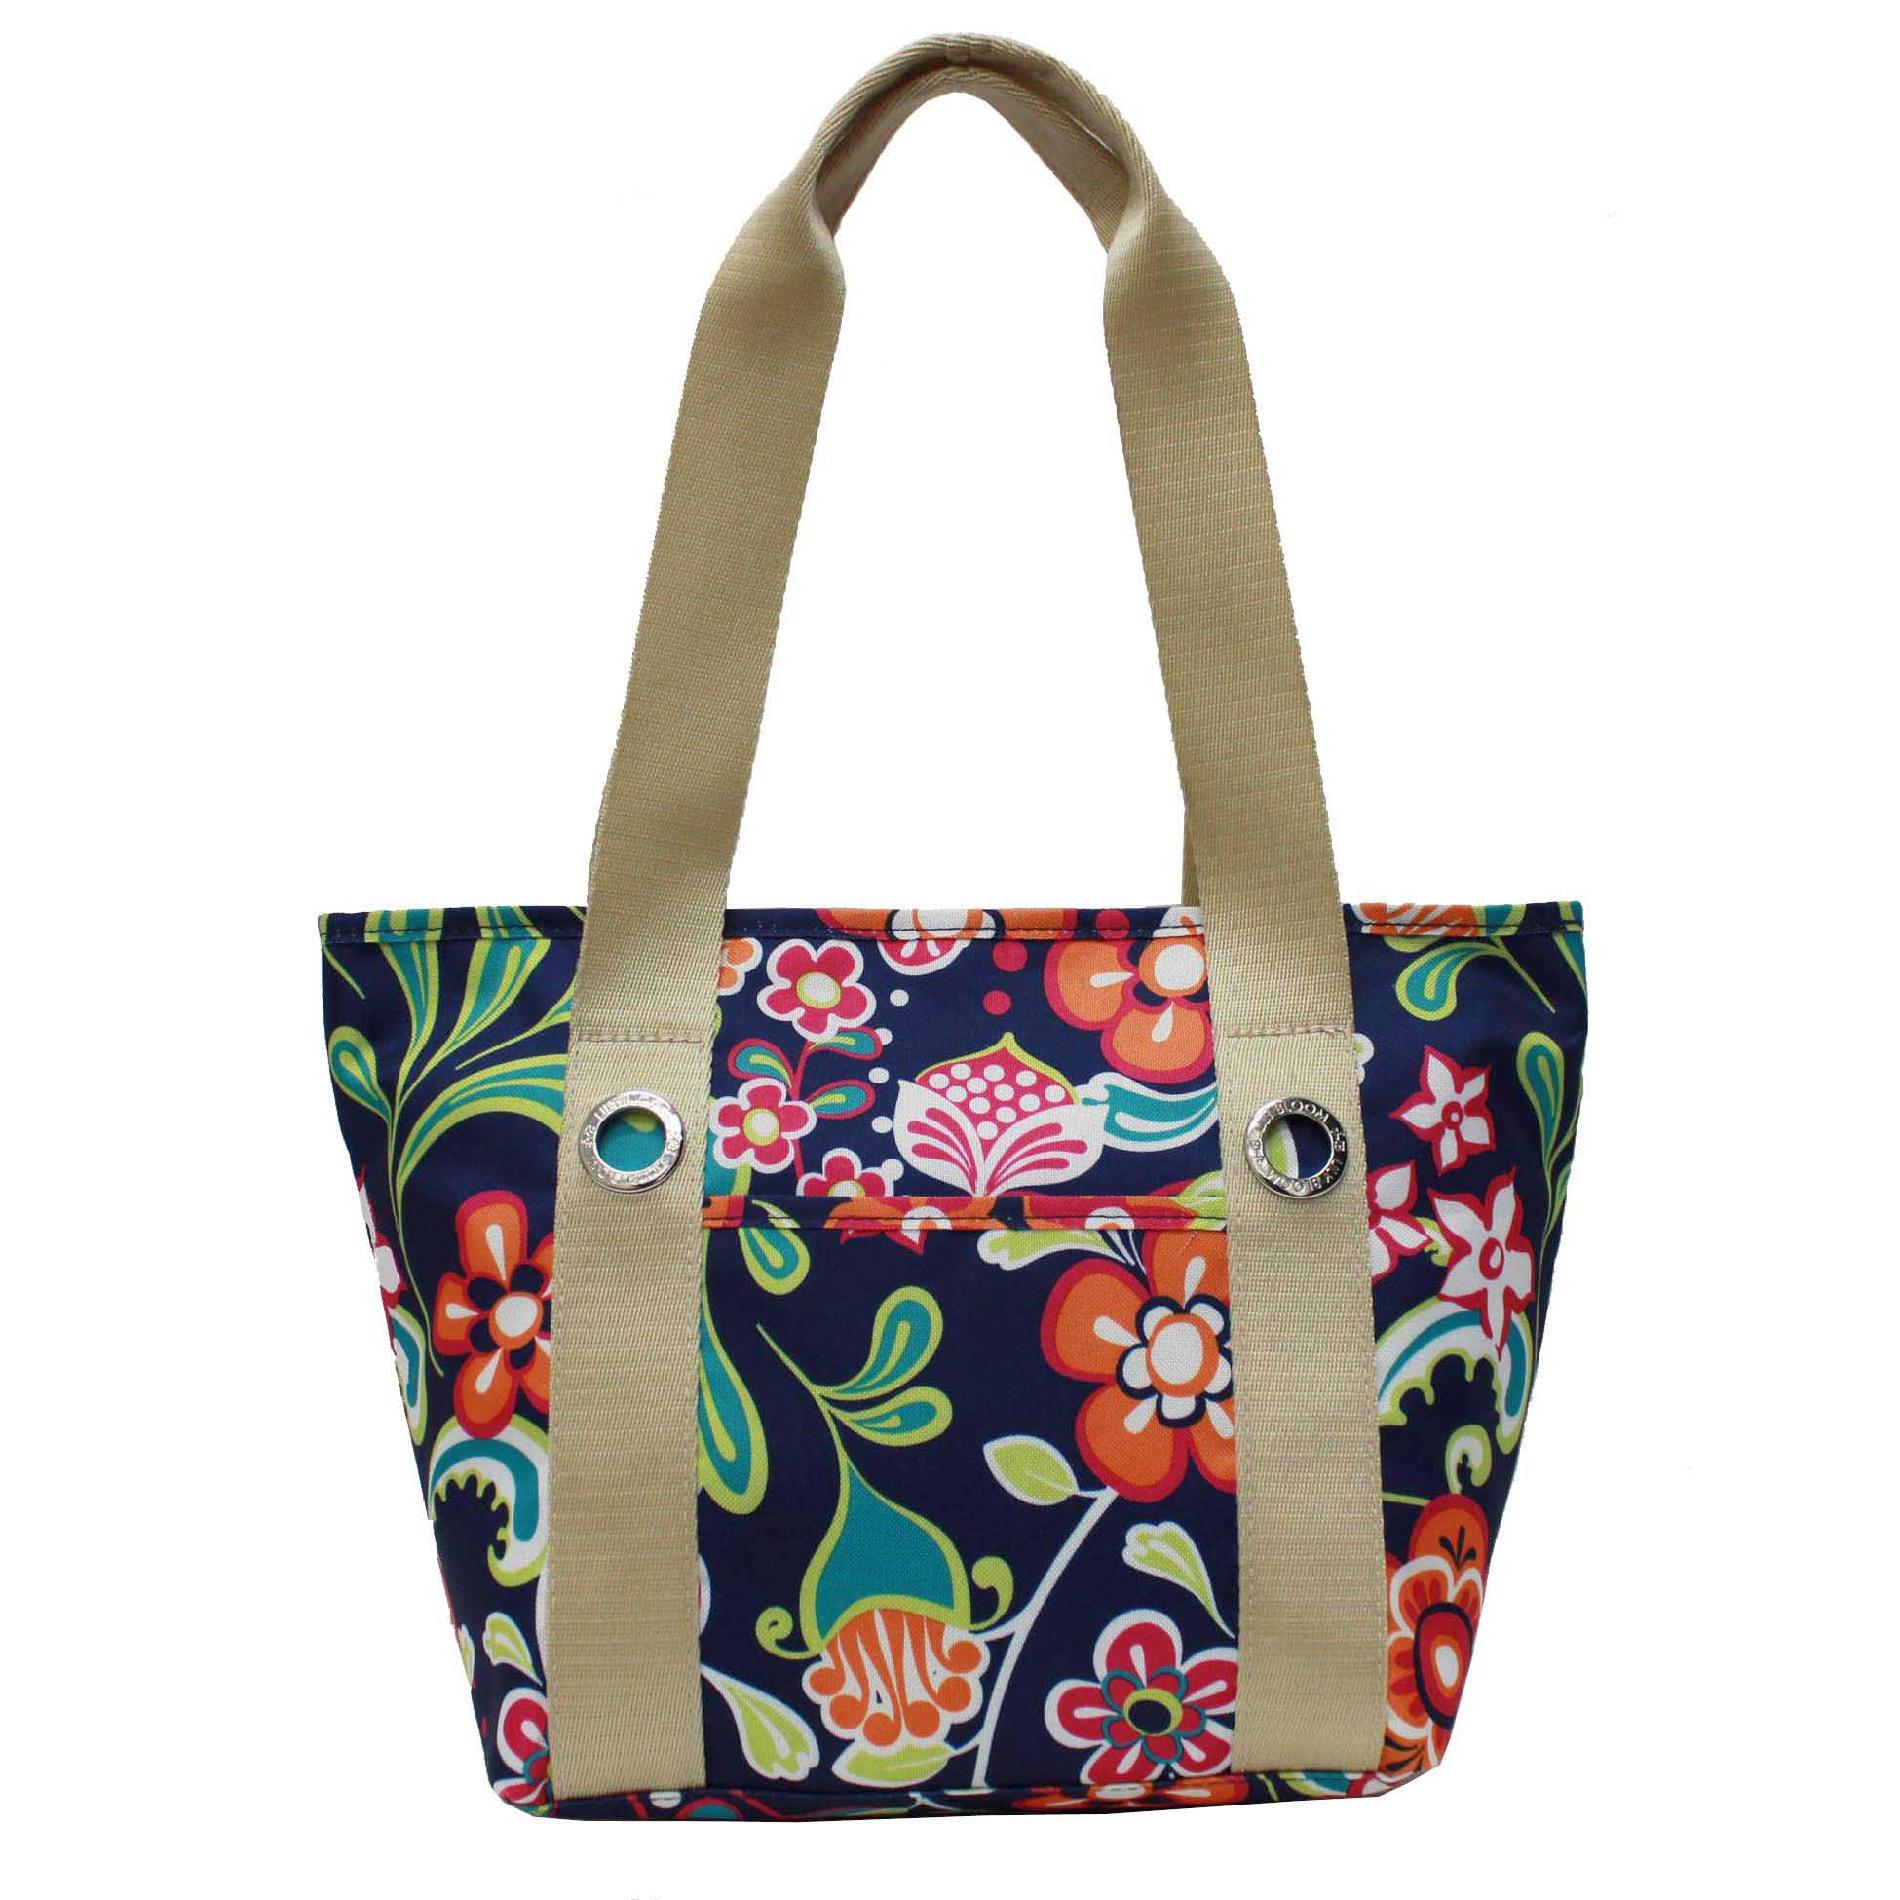 Rosetti Women's Tote Bag - Floral - Clothing - Bags & Accessories ...